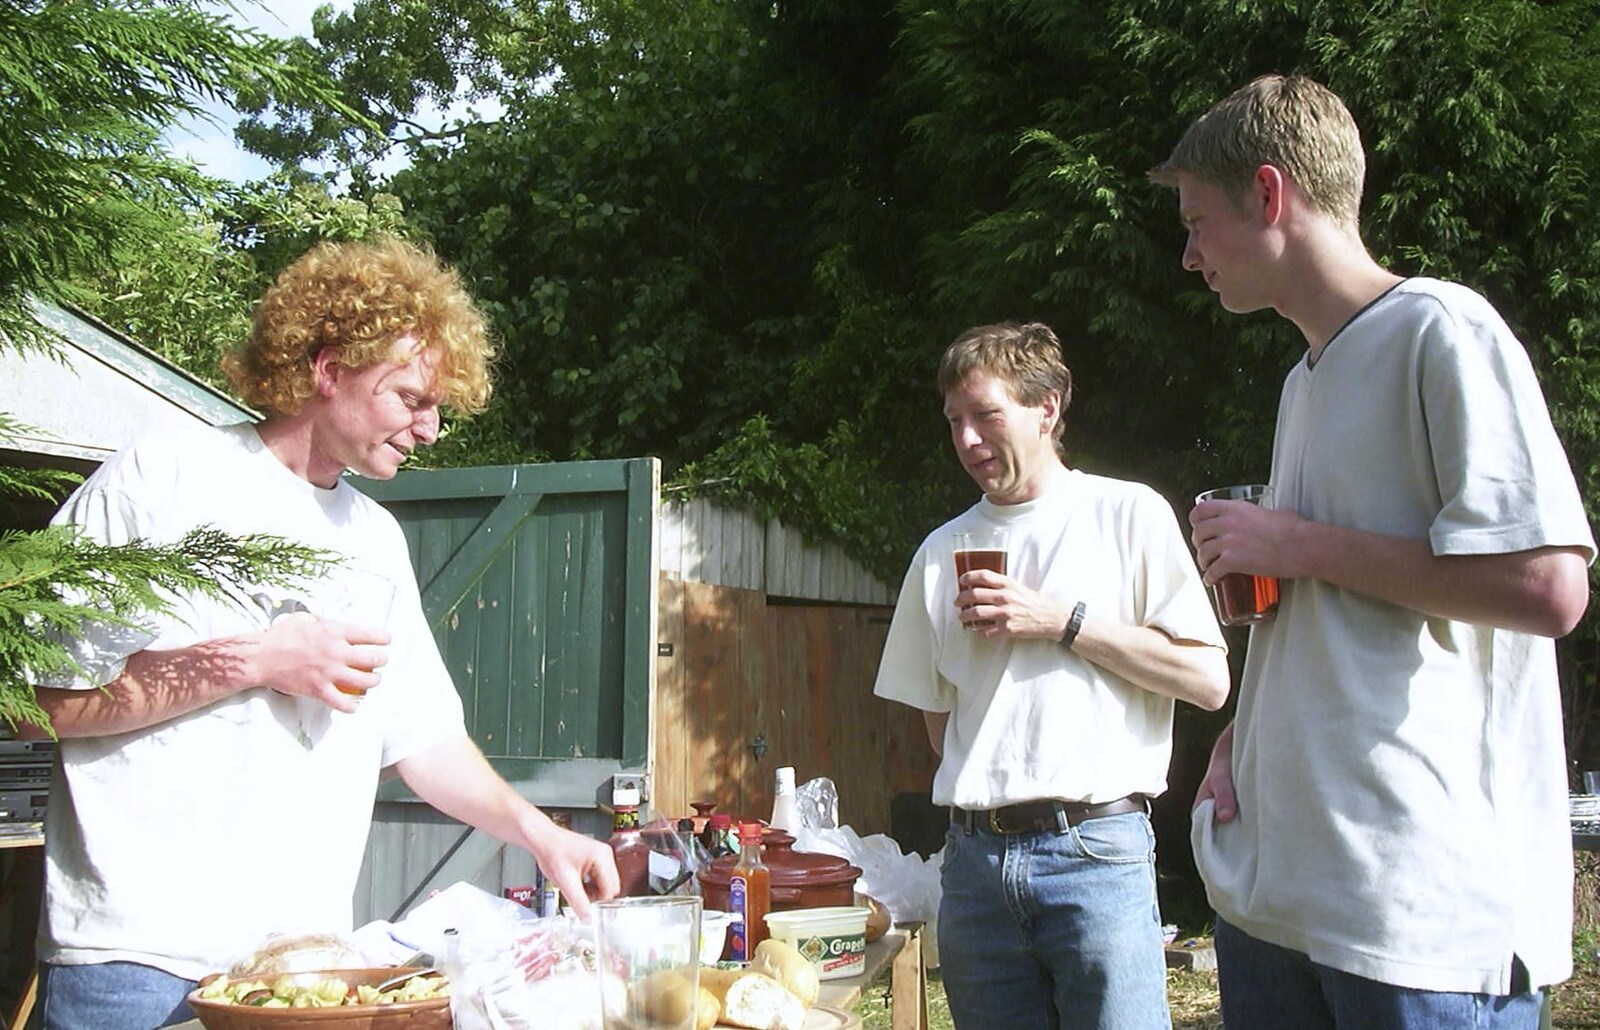 Wavy, Apple and The Boy Phil from DH's BSCC Barbeque, The Old Post Office, Brome, Suffolk - 7th July 2002